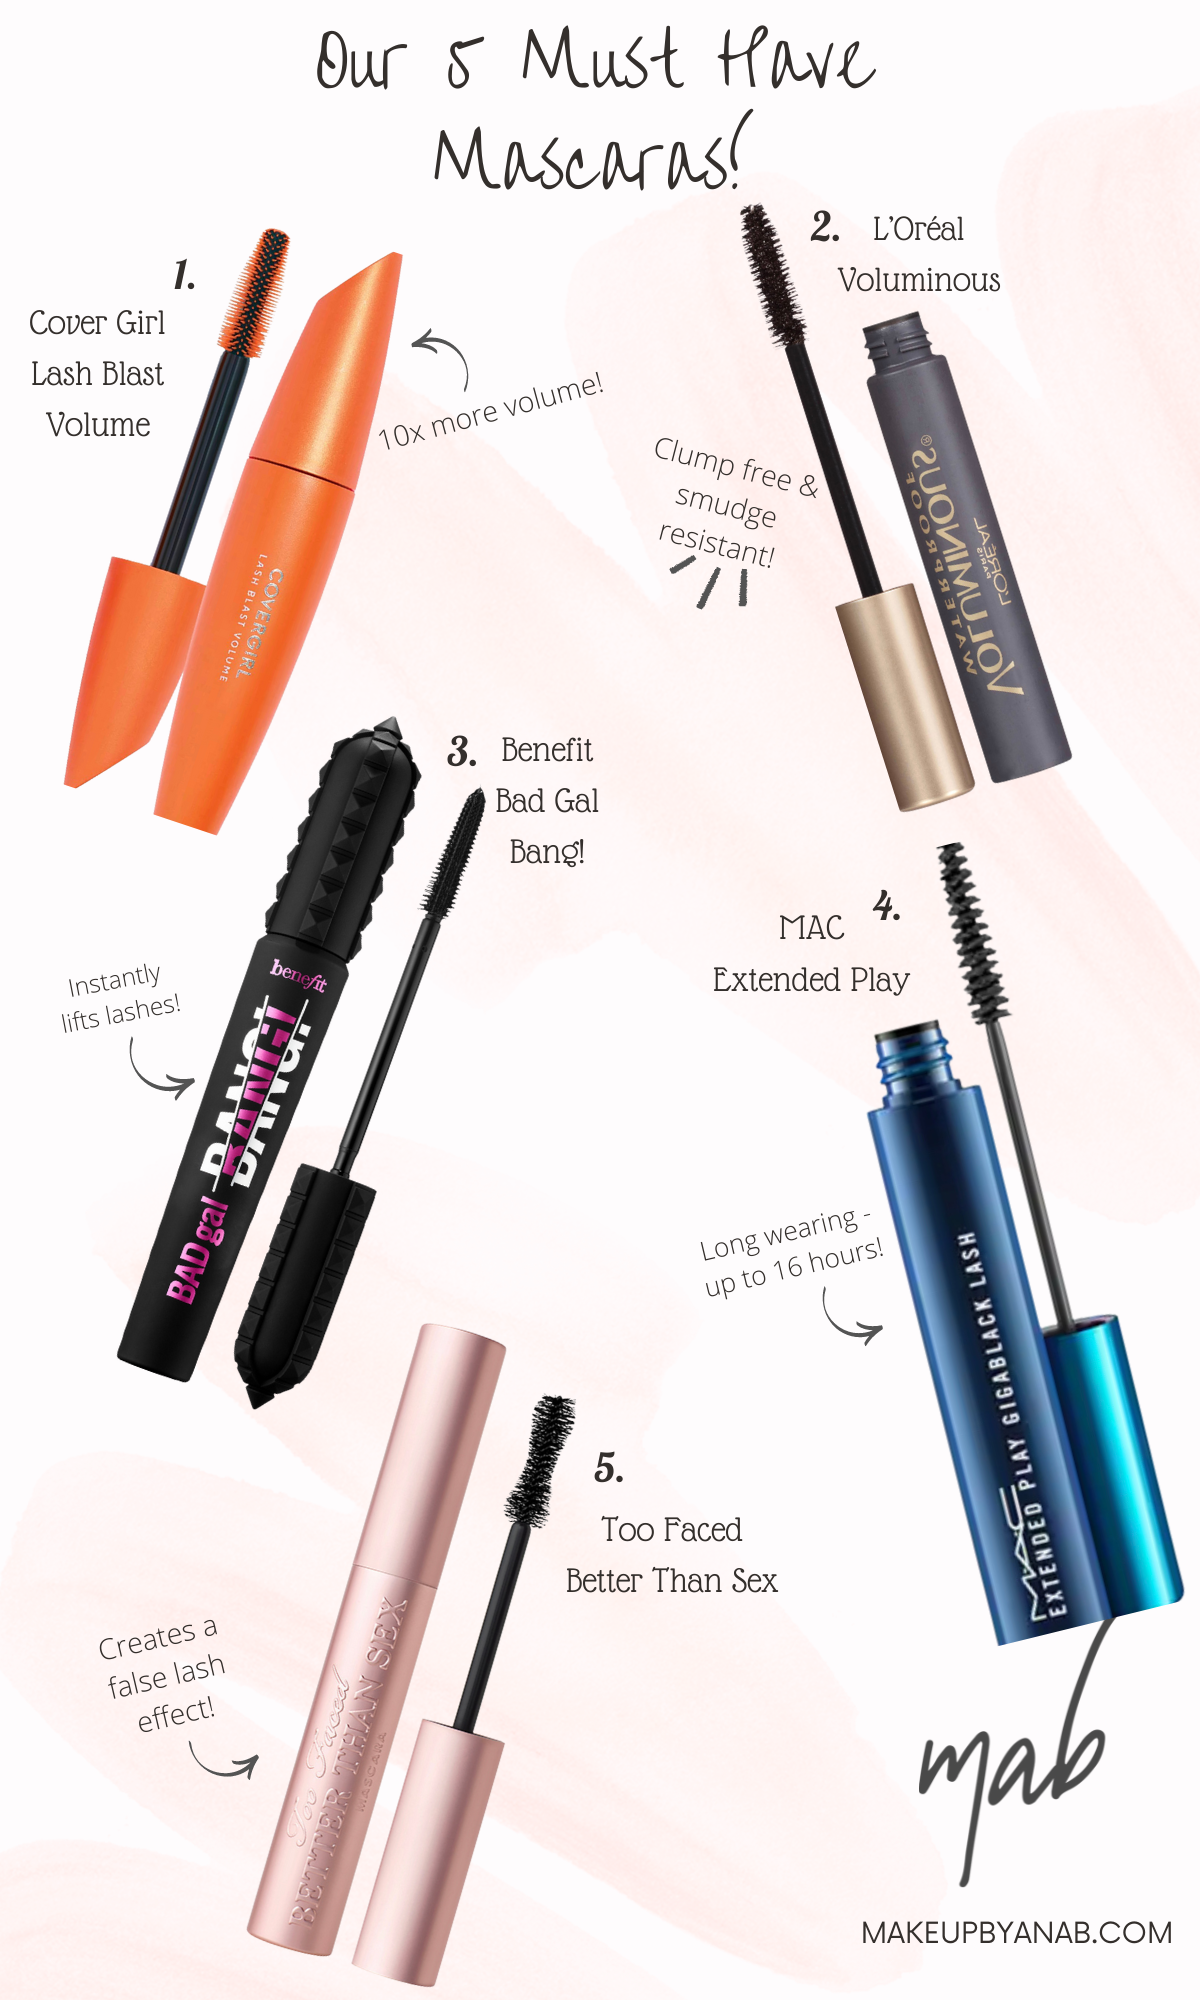 Our Must Have Mascaras! - Makeup by Ana B